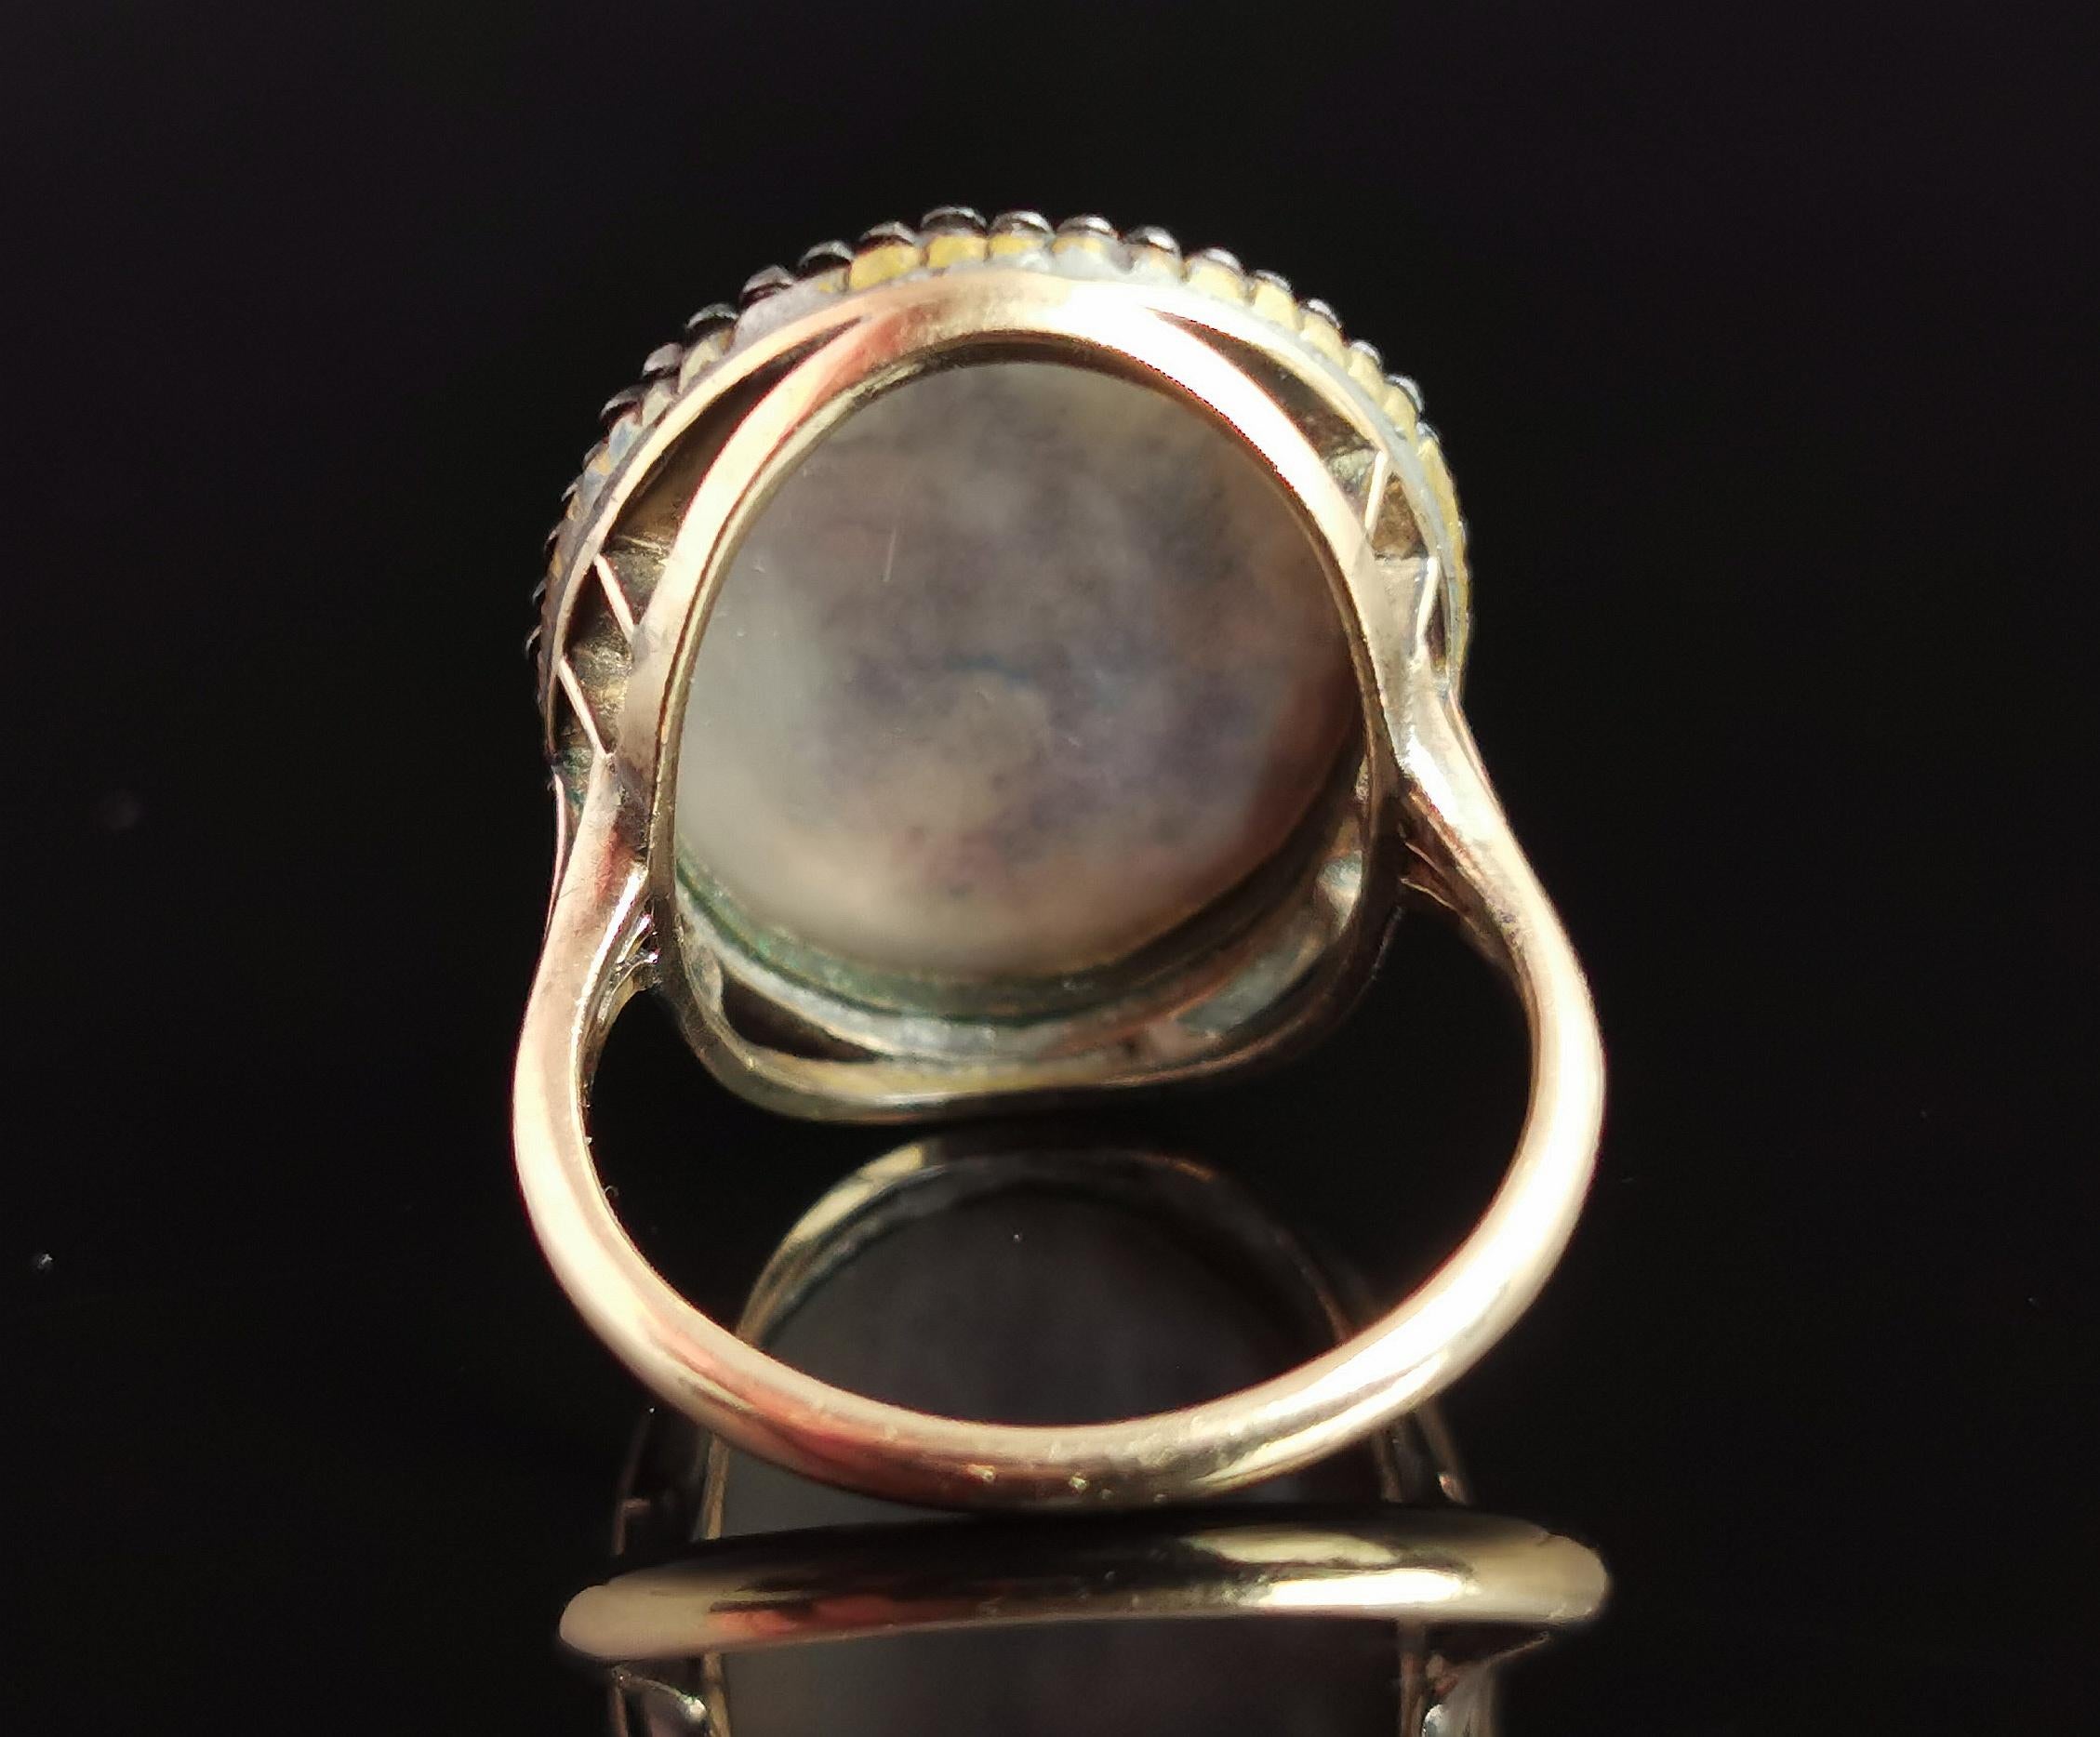 Women's Antique Enamelled Portrait Ring, 9k Gold, Cut Steel and Mother of Pearl